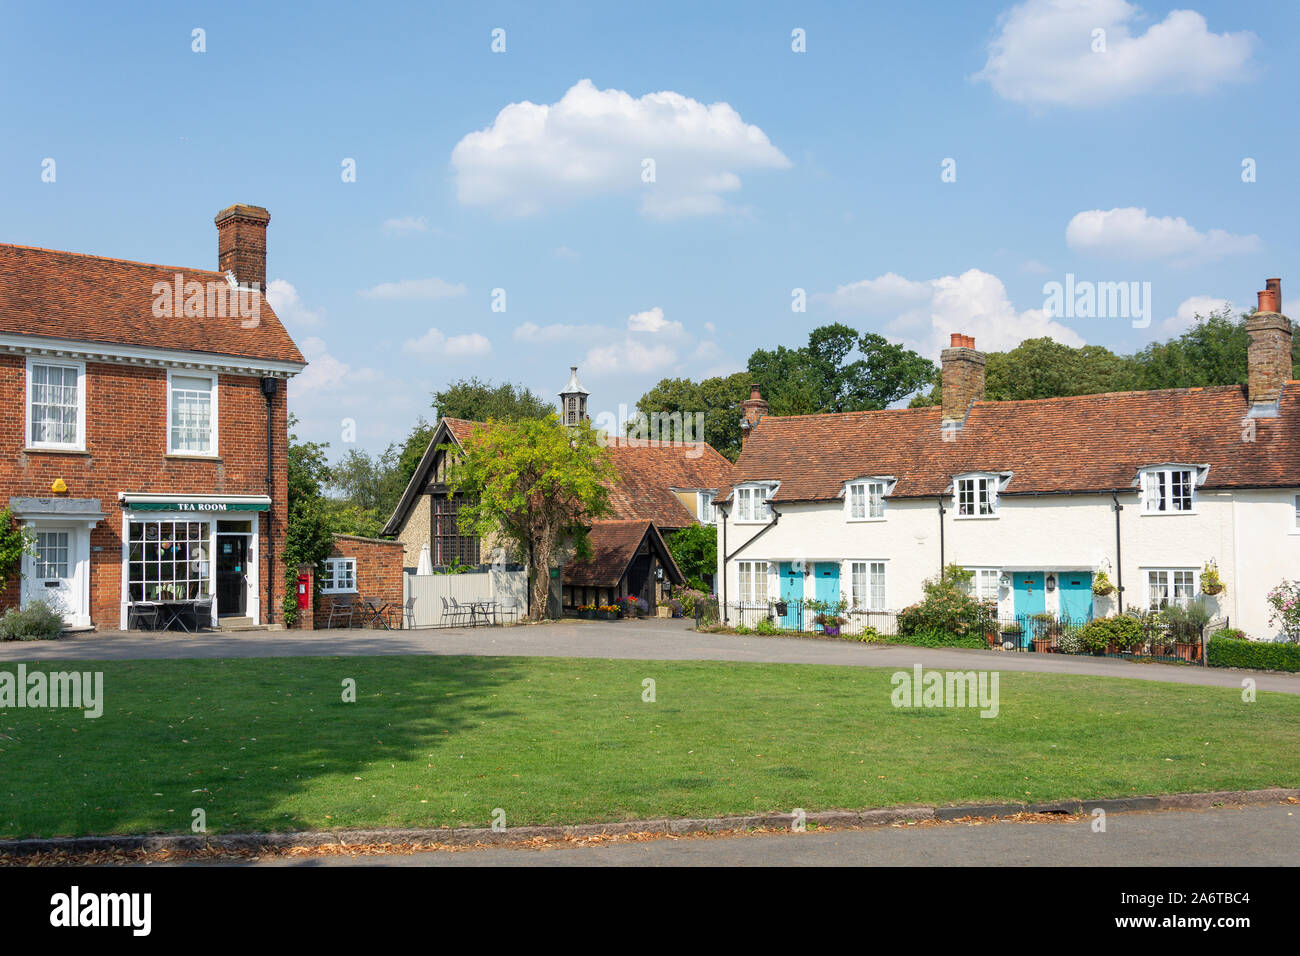 Period cottages on The Green, Westmill, Hertfordshire, England, United Kingdom Stock Photo